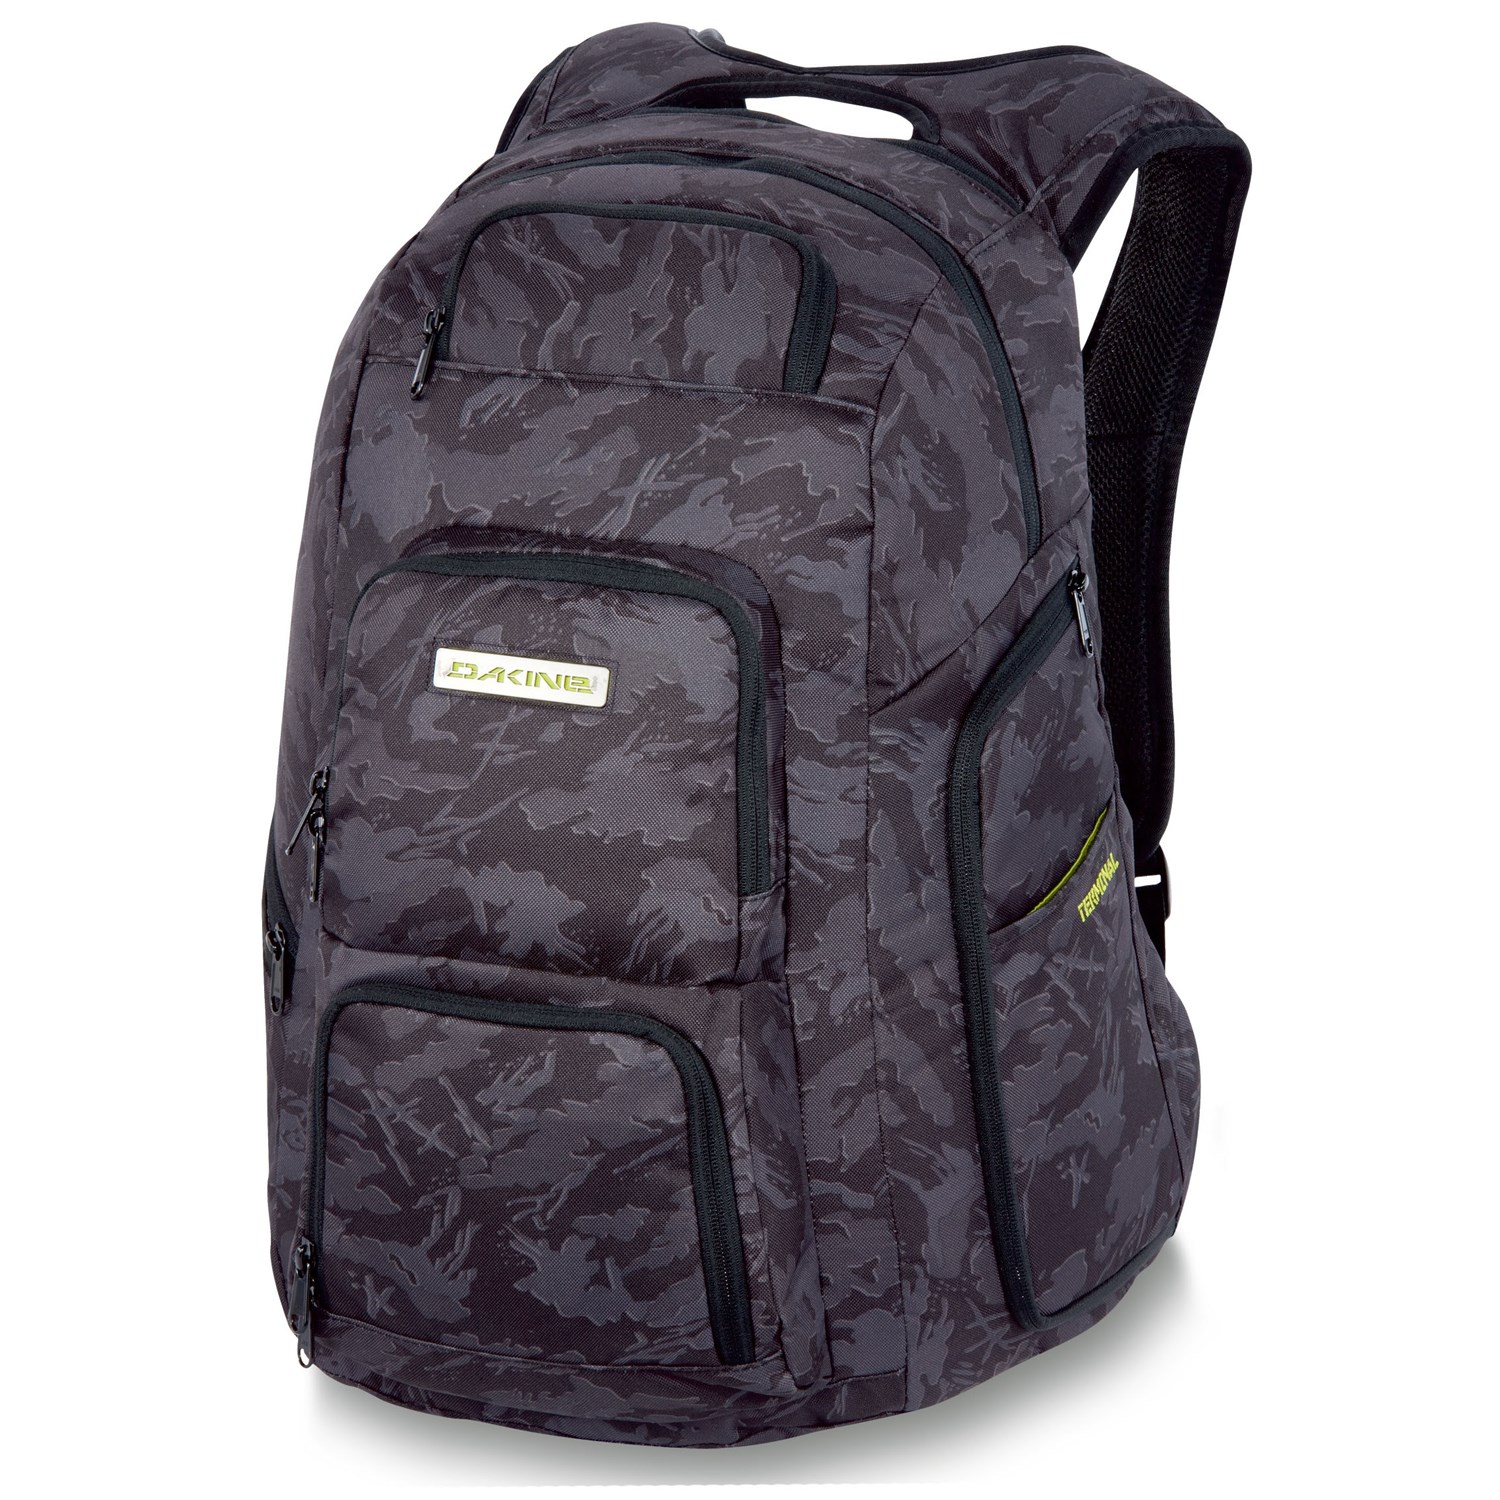 Scarters Terminal Backpack T2 London 26.6 L Laptop Backpack - Price History